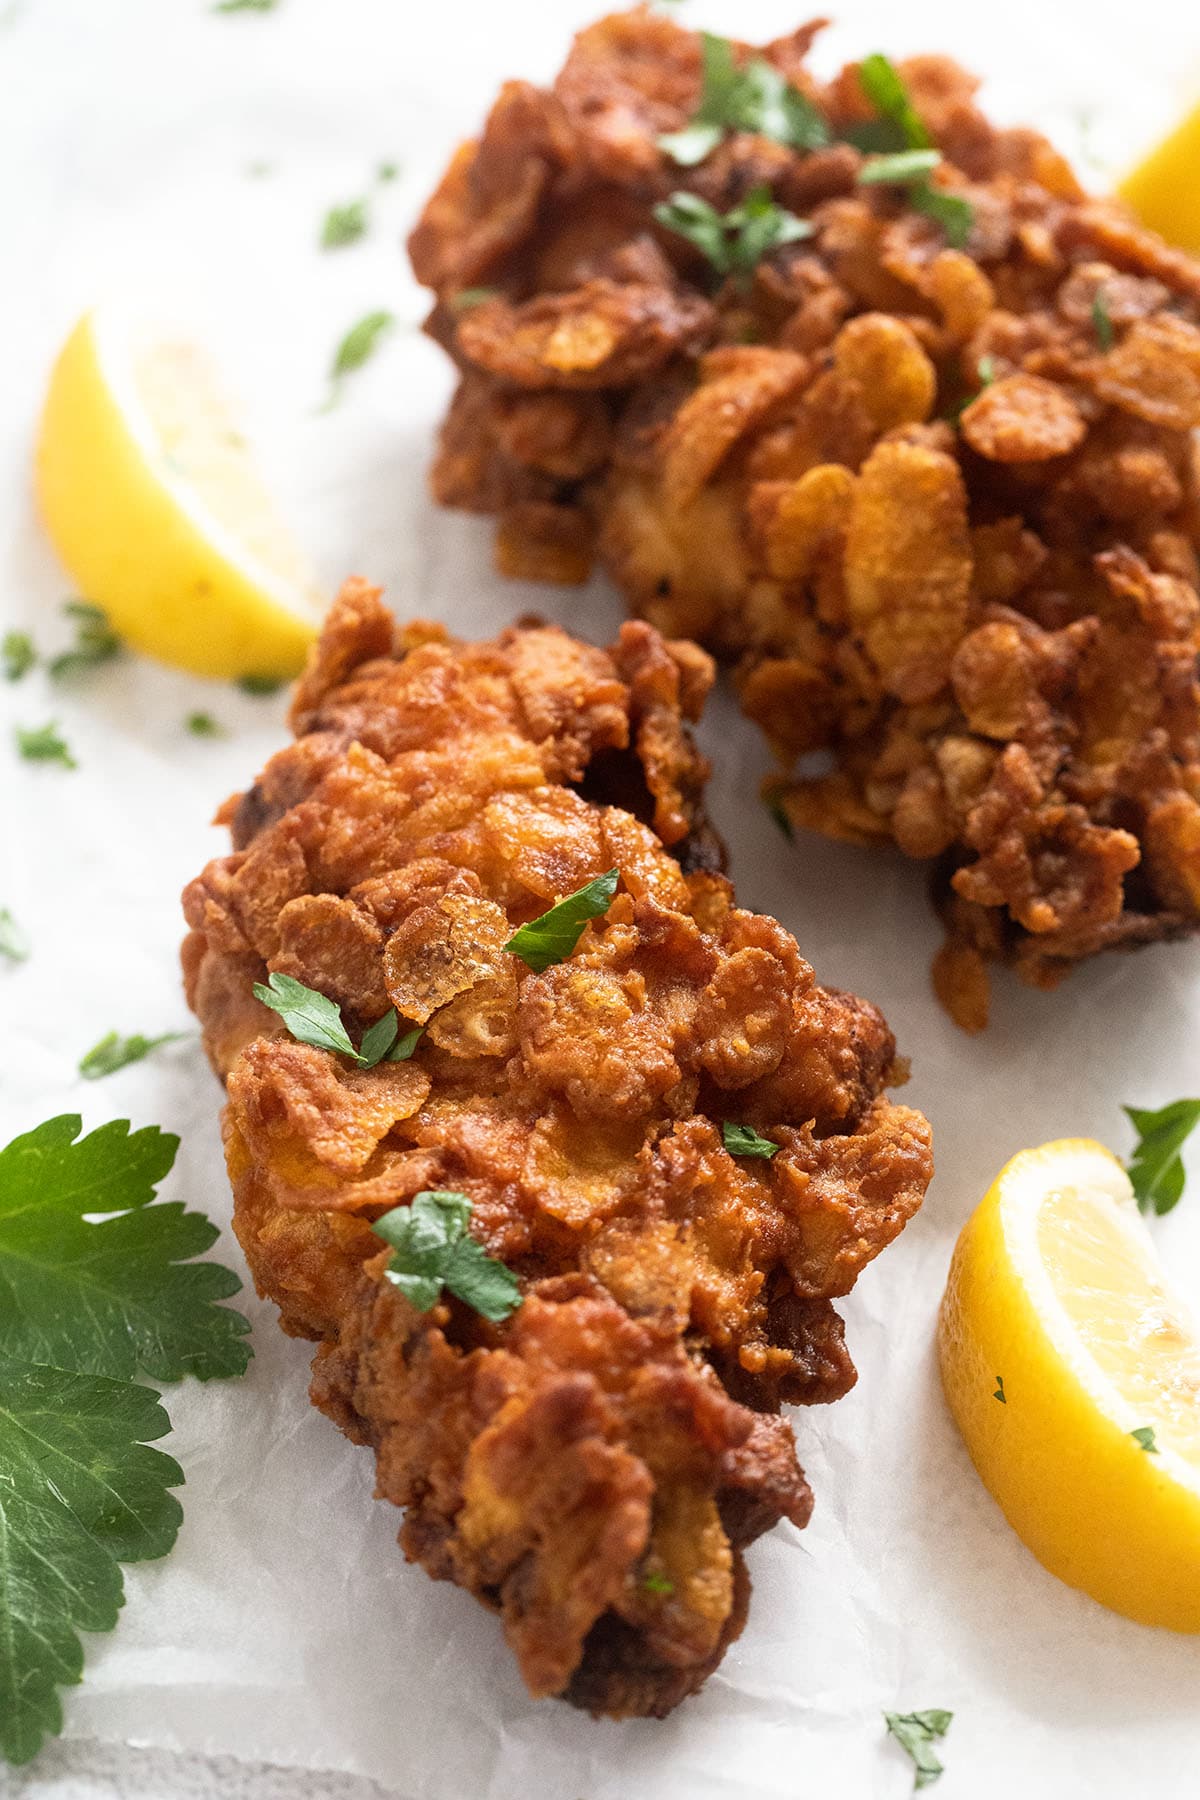 two chicken pieces fried in a cornflake coating.